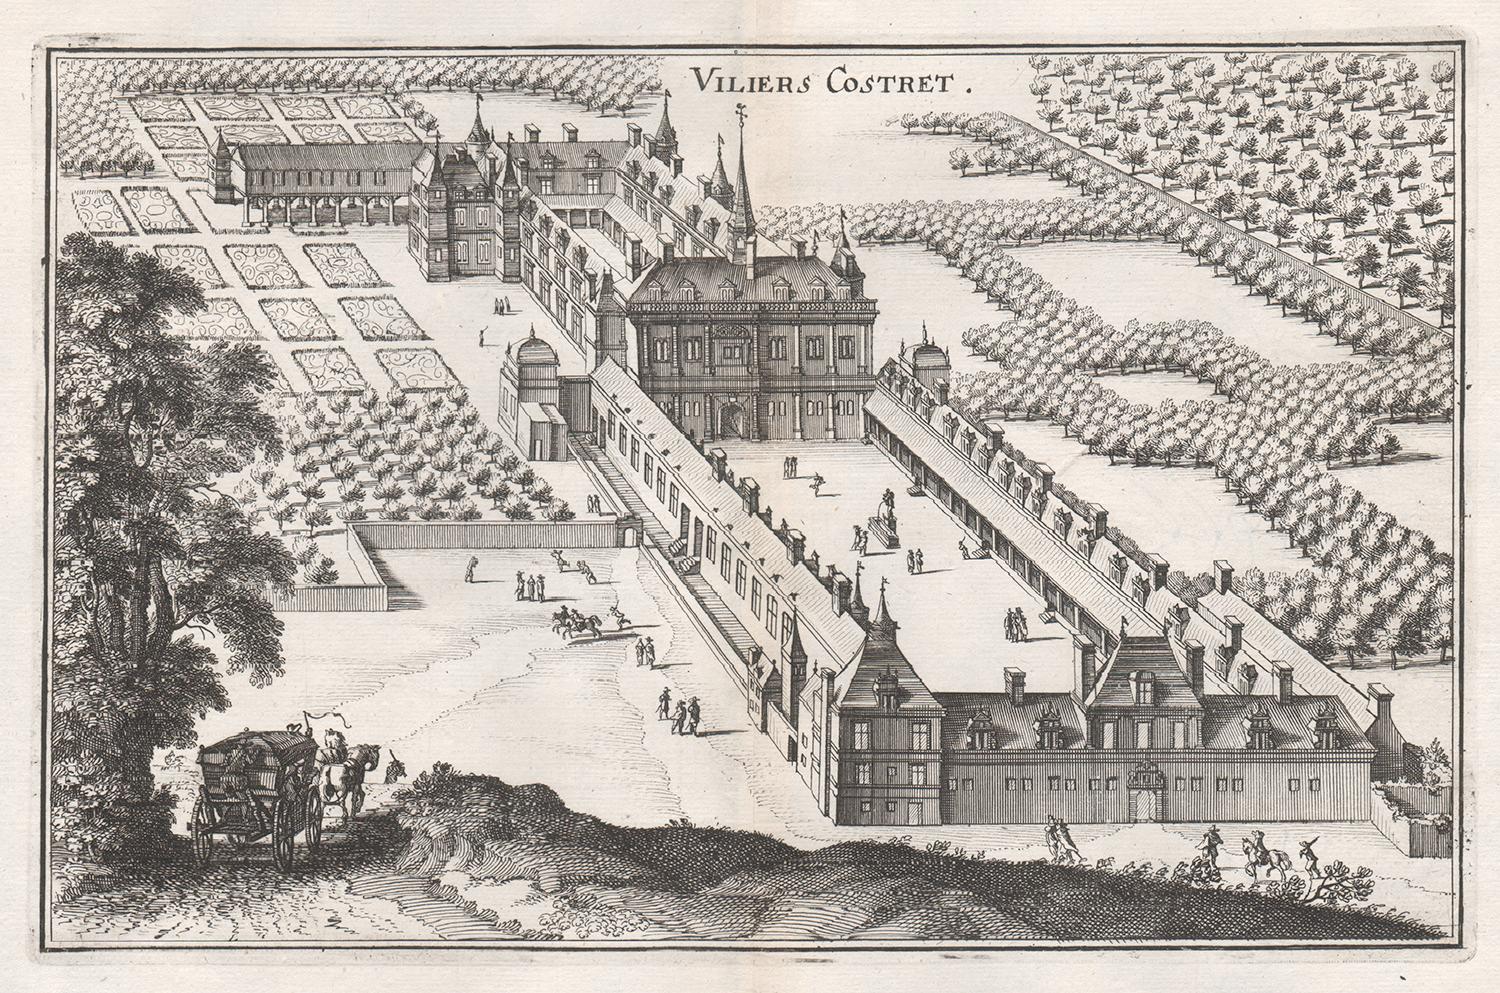 Viliers Costret, French chateau, architectural plan, mid 17th century engraving